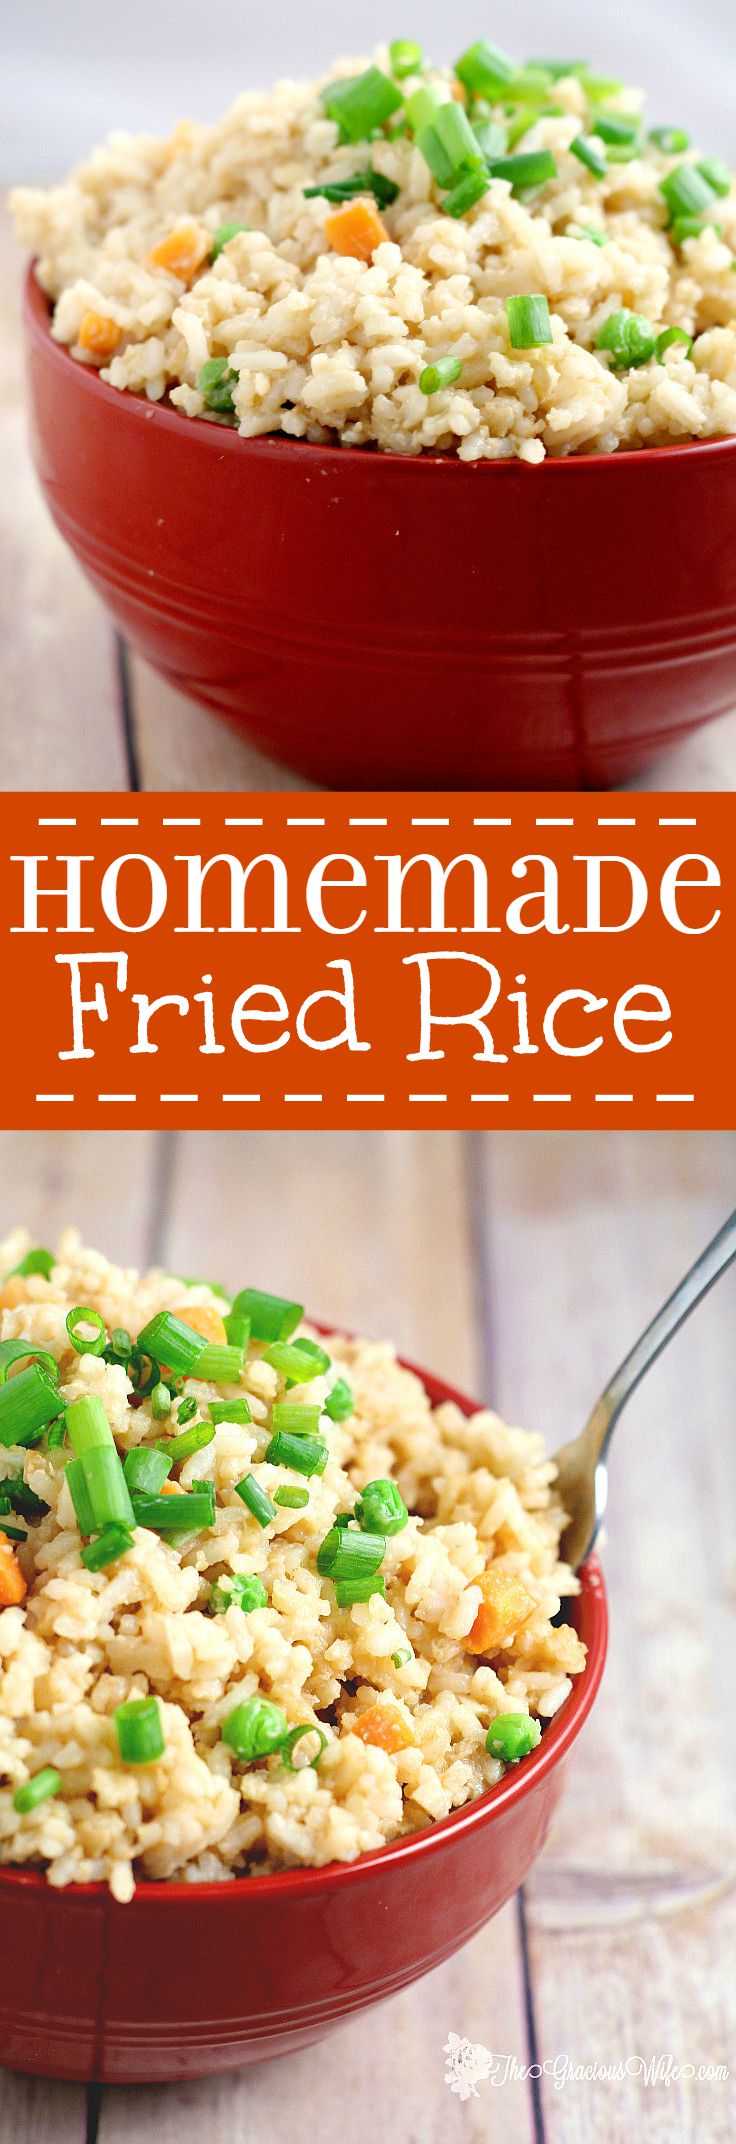 Learn how to make homemade Fried Rice at home with this easy copycat Fried Rice Recipe.  As good as the real restaurants! Great for an easy rice side dish recipe!